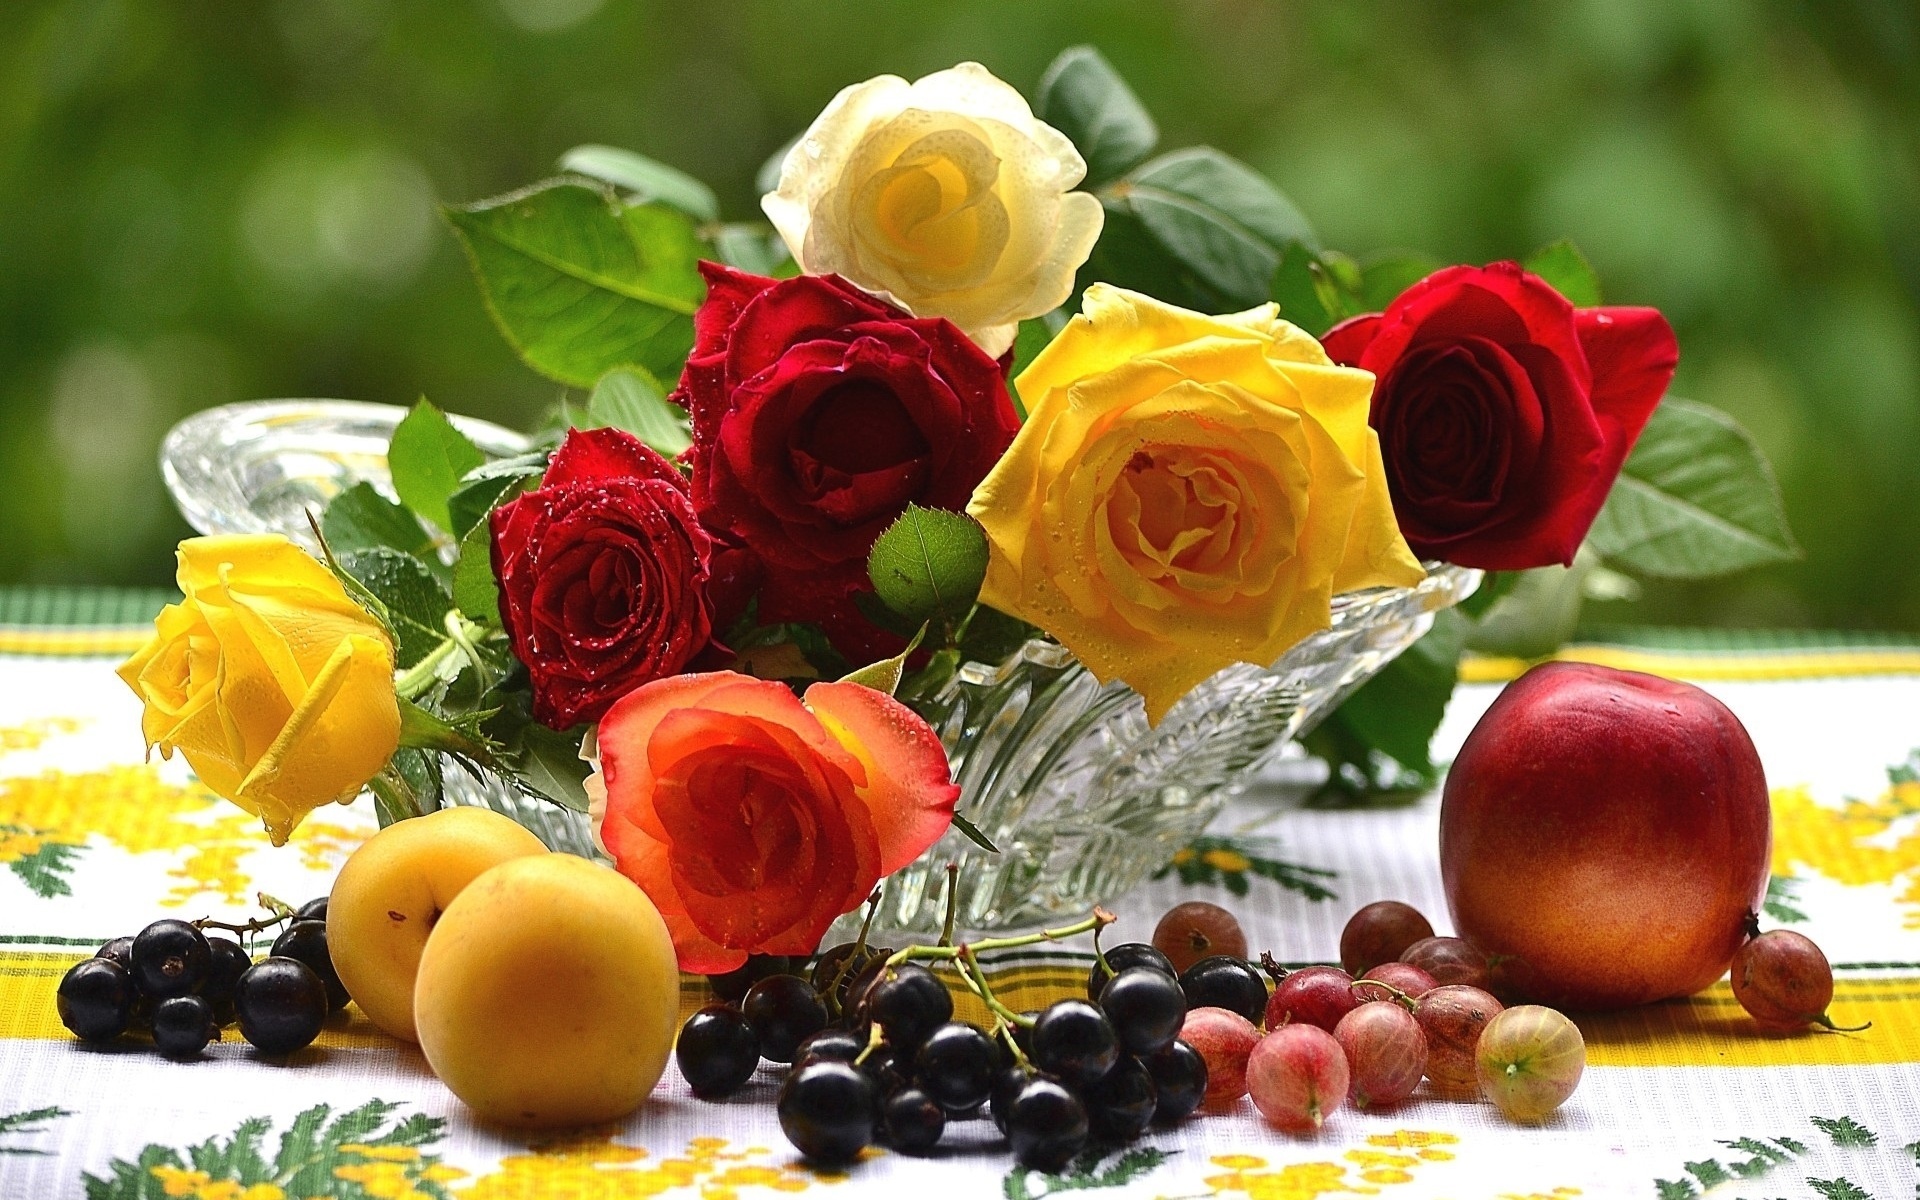 fruits, fresh colorful, bouquet, still, roses, life, flower, flwers, nature